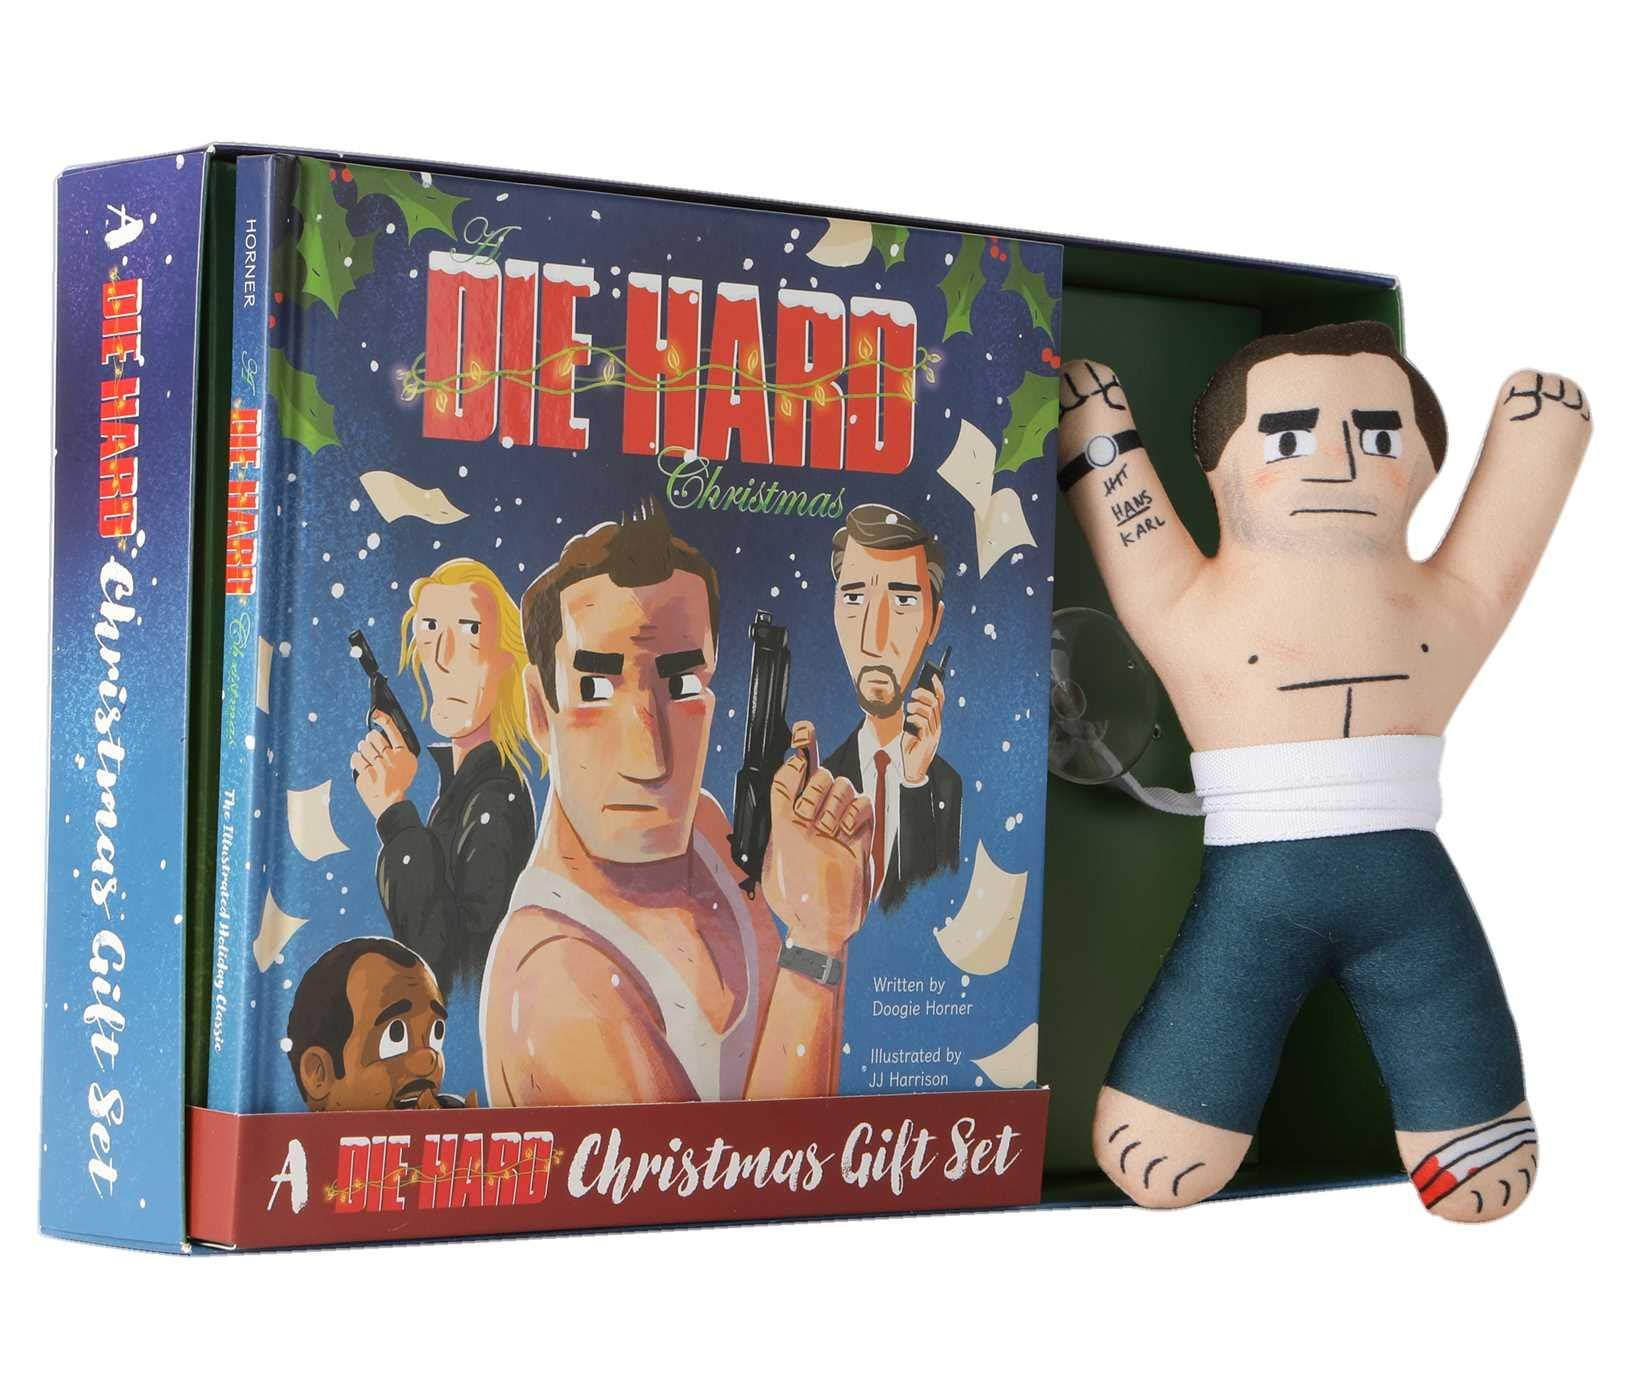 A Die Hard Christmas Gift Set Hardcover for $4.99